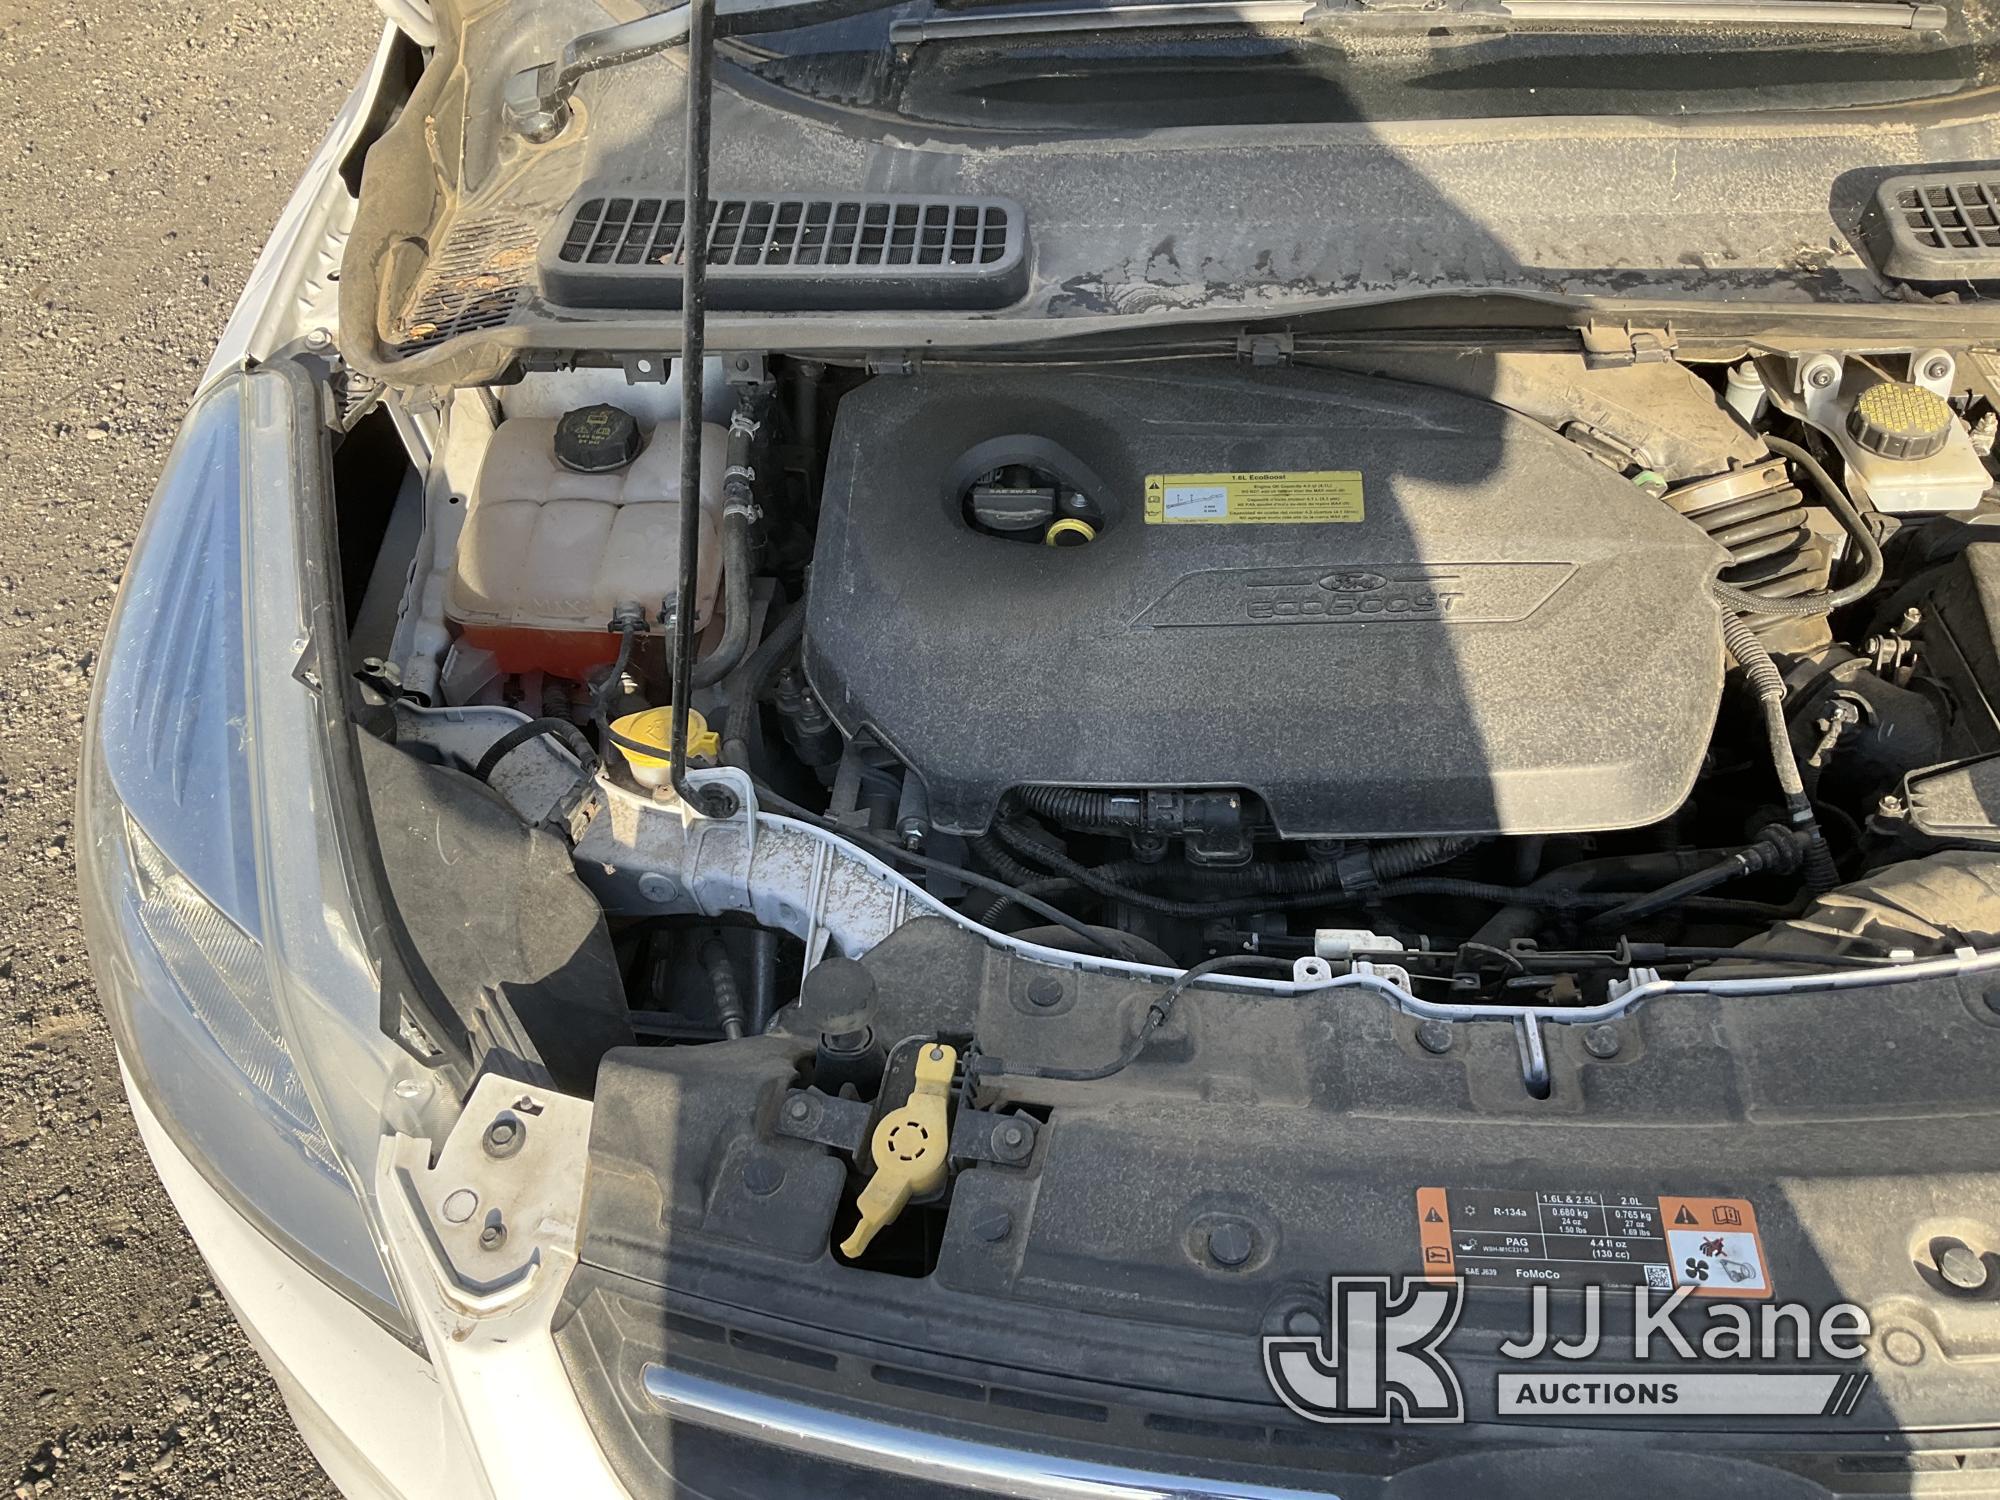 (Jurupa Valley, CA) 2014 Ford Escape AWD Sport Utility Vehicle Not Running, Has Check Engine Light O